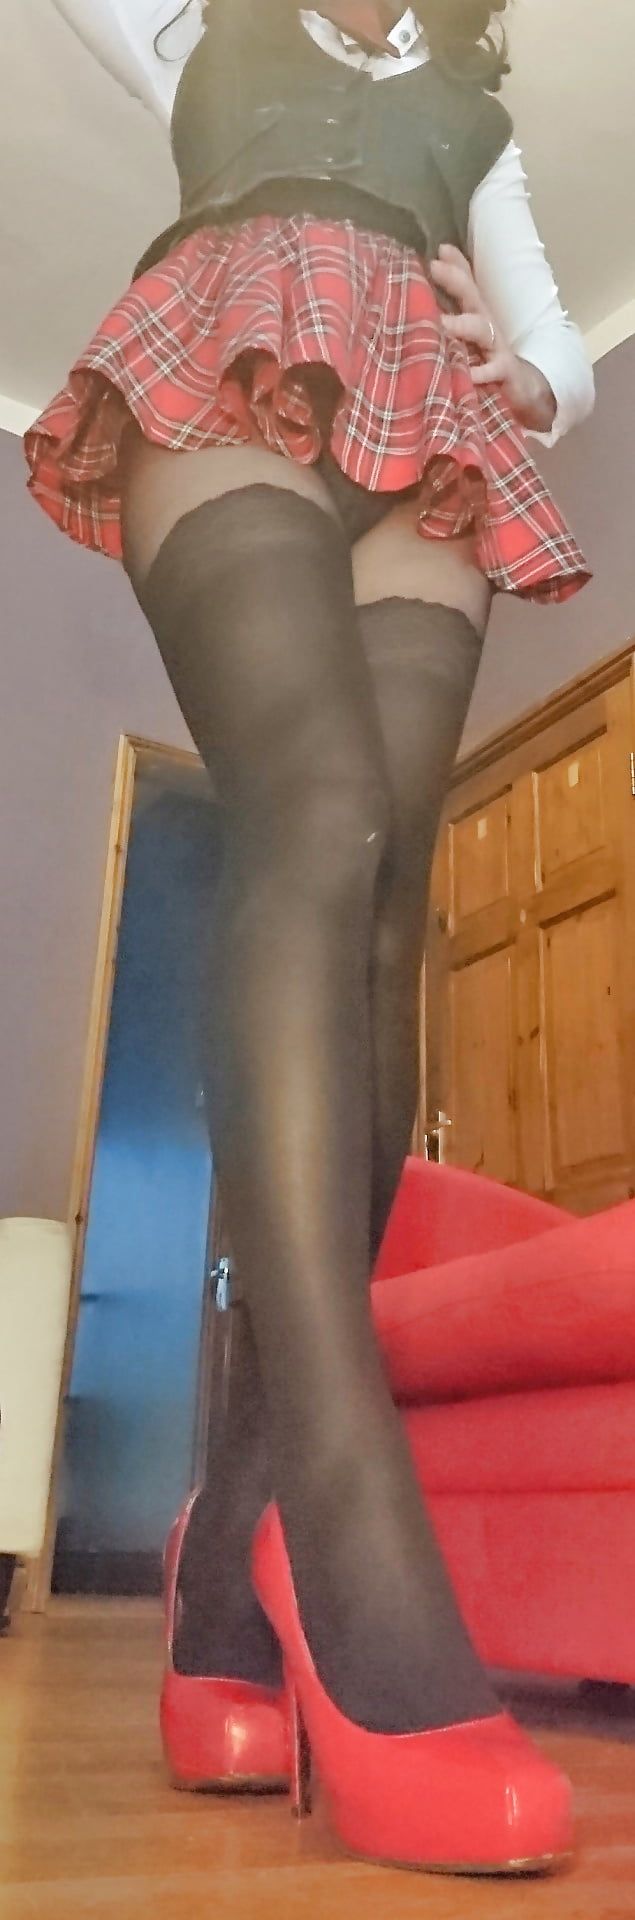 Marie crossdresser in fashion pantyhose with stocking print #5